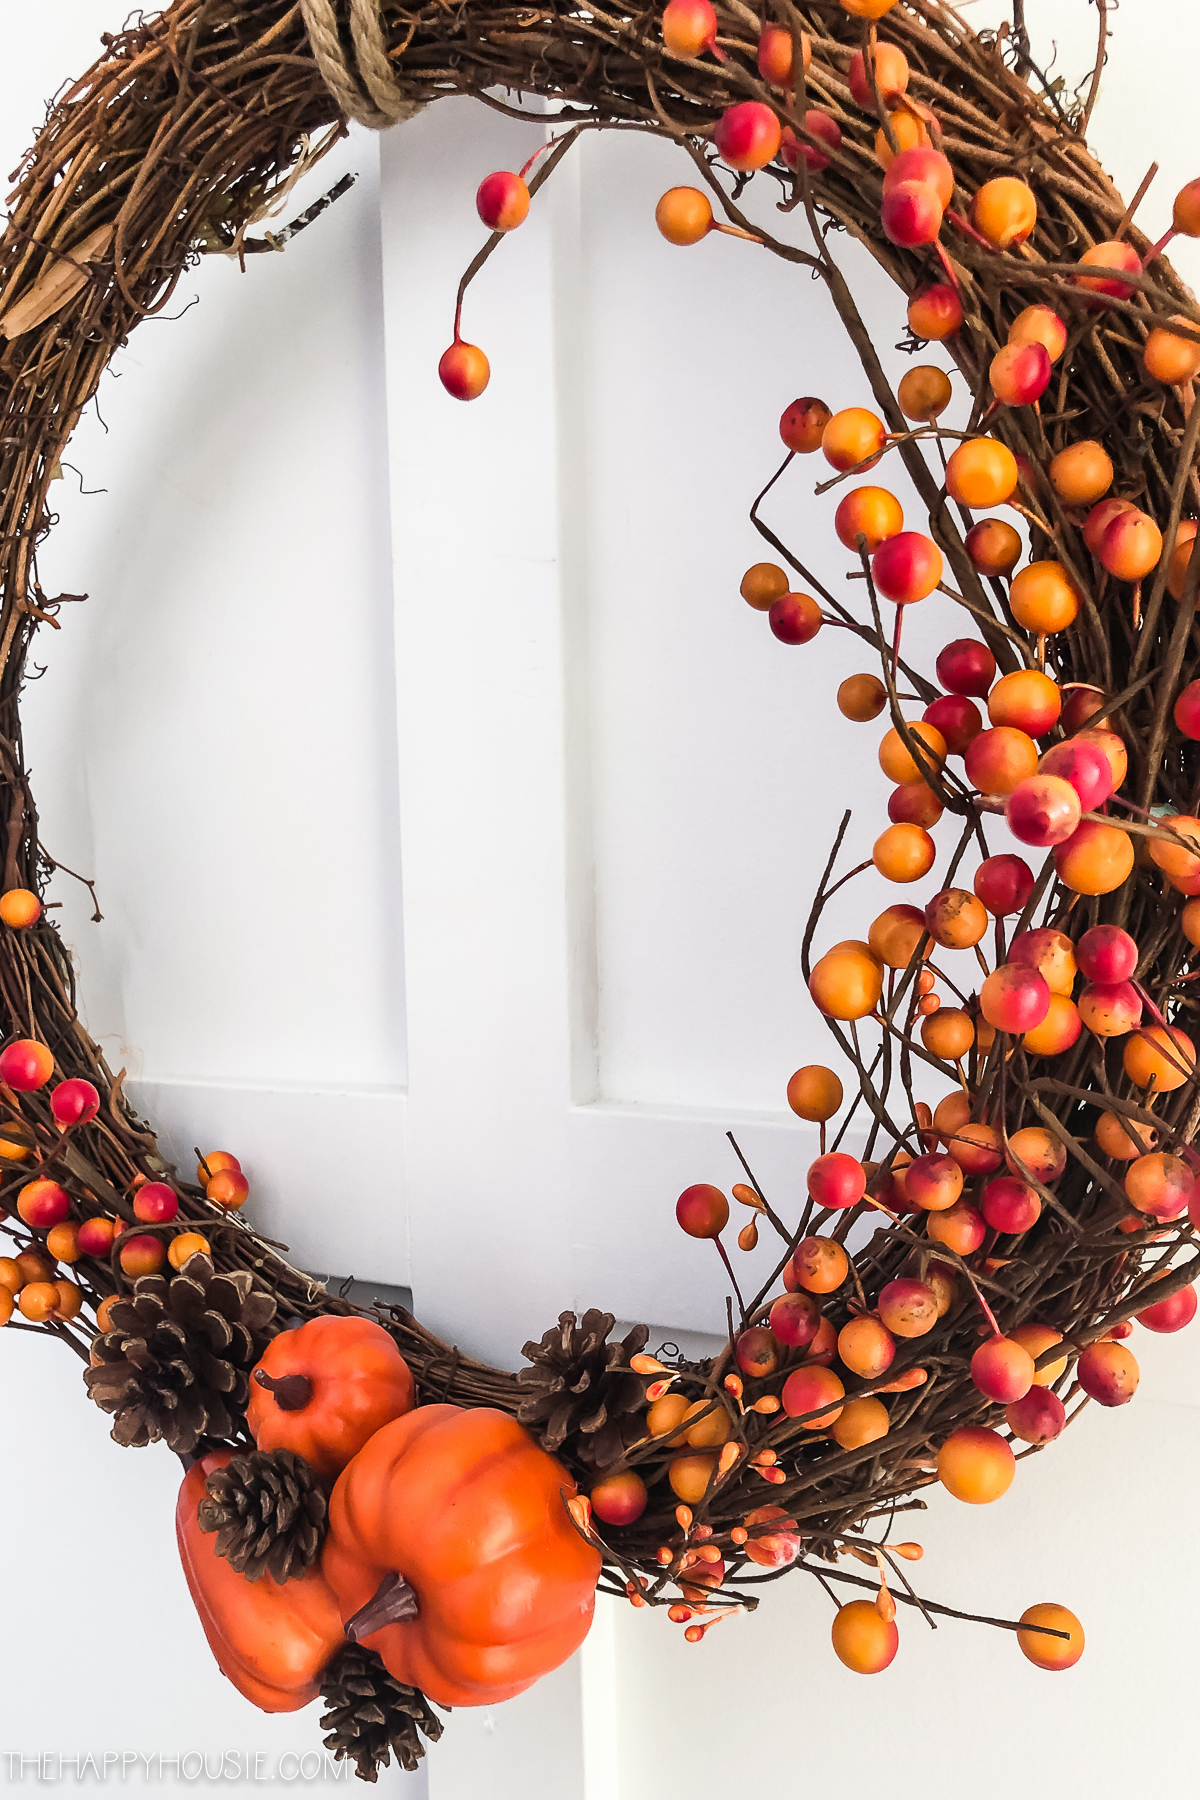 The orange and red berries, pine cones, pumpkins on the wreath.